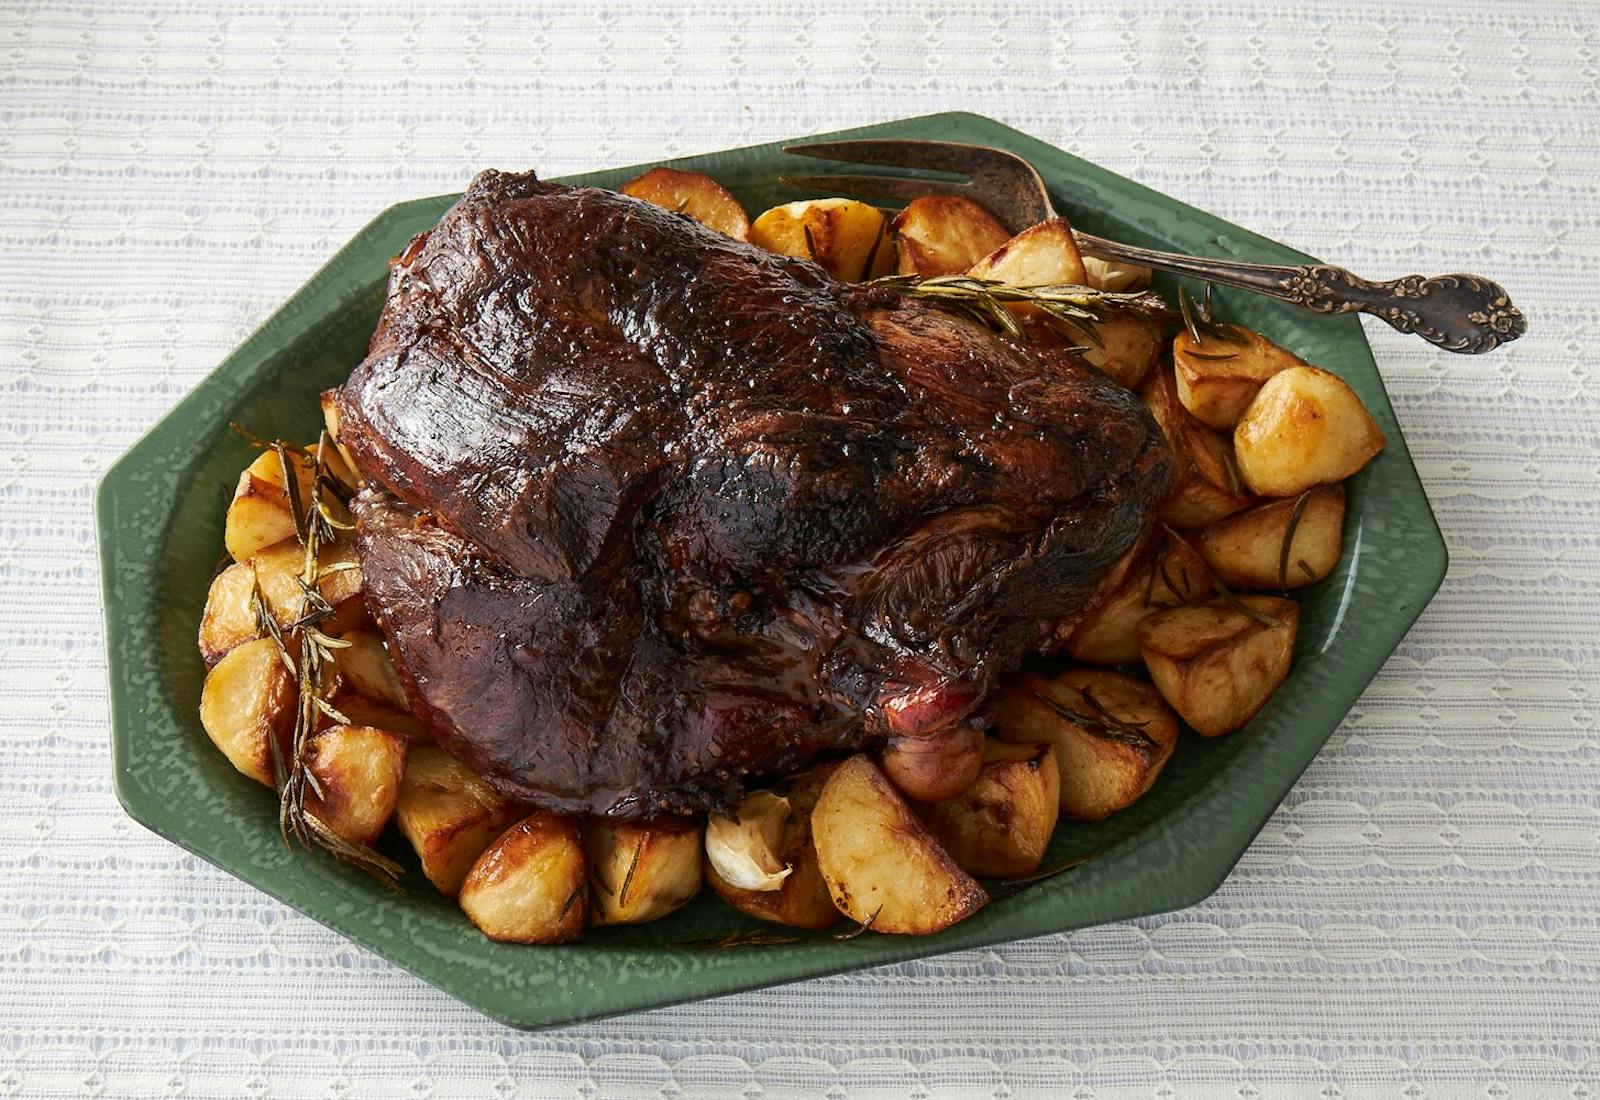 Roasted lamb shoulder with herbs and potatoes, green serving dish.